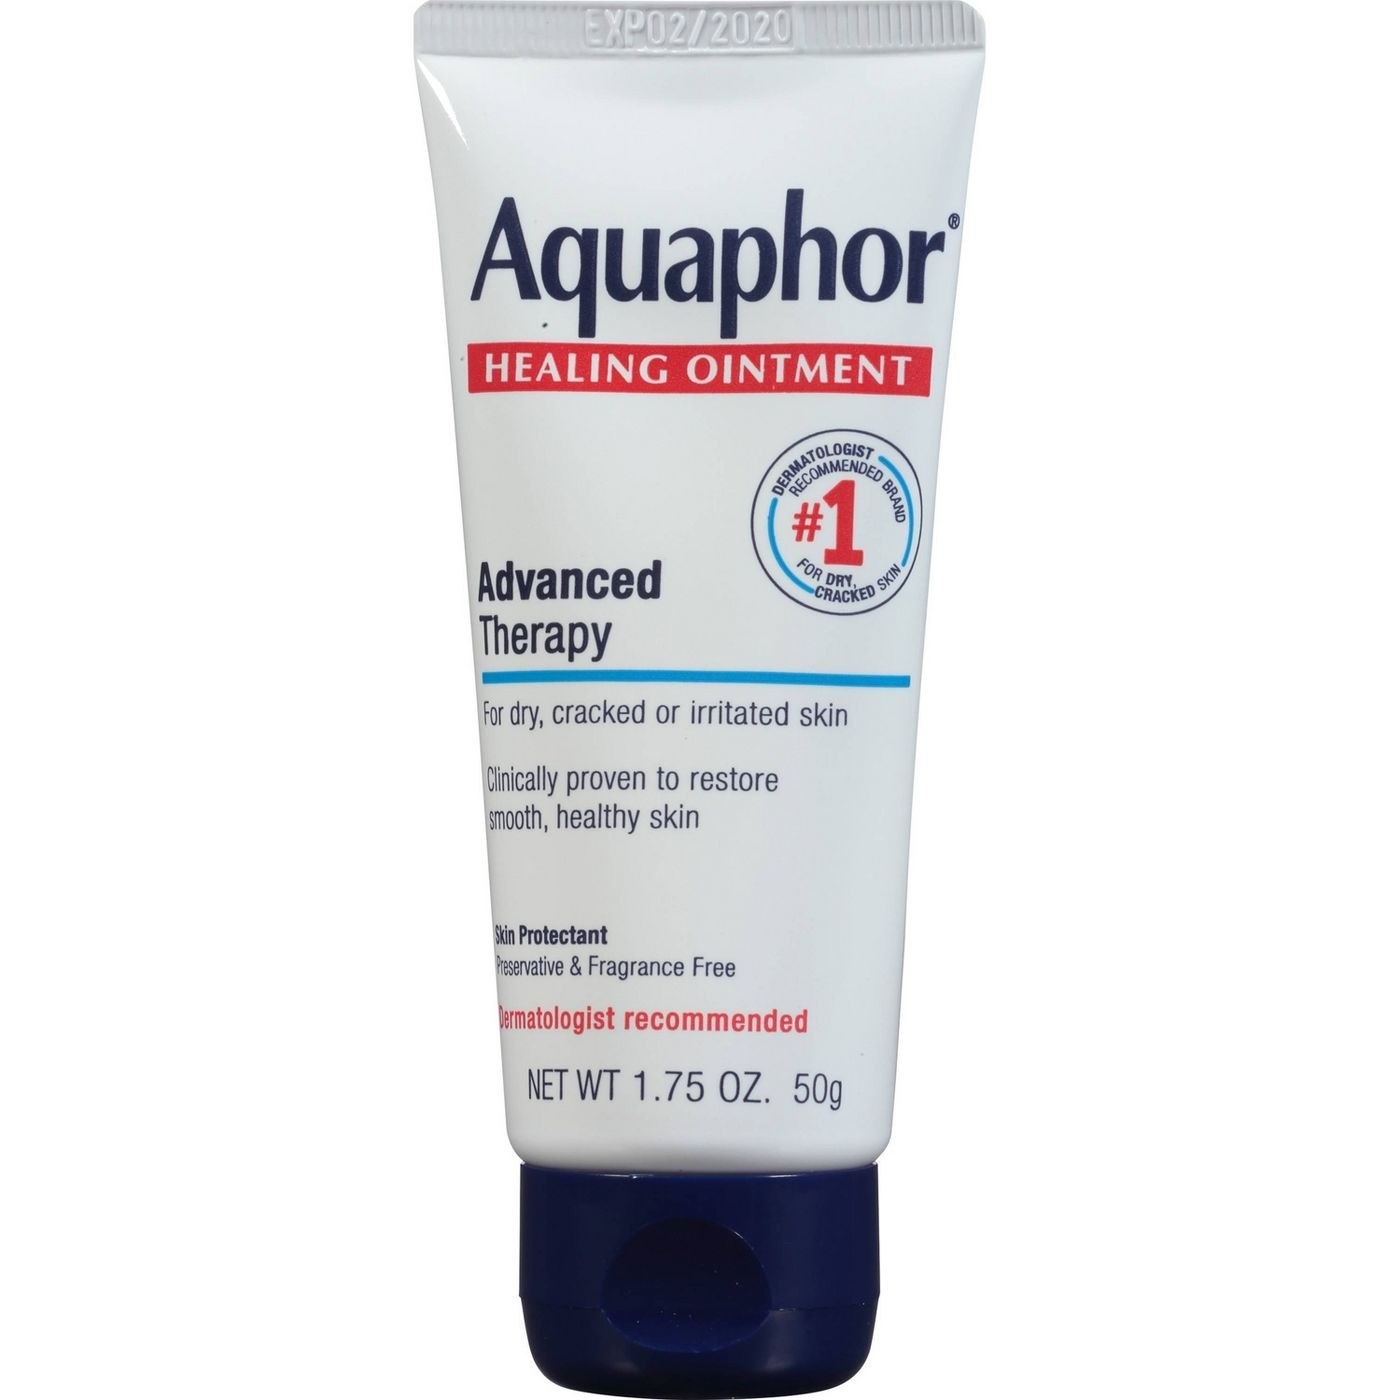 The Aquaphor advanced therapy healing ointment